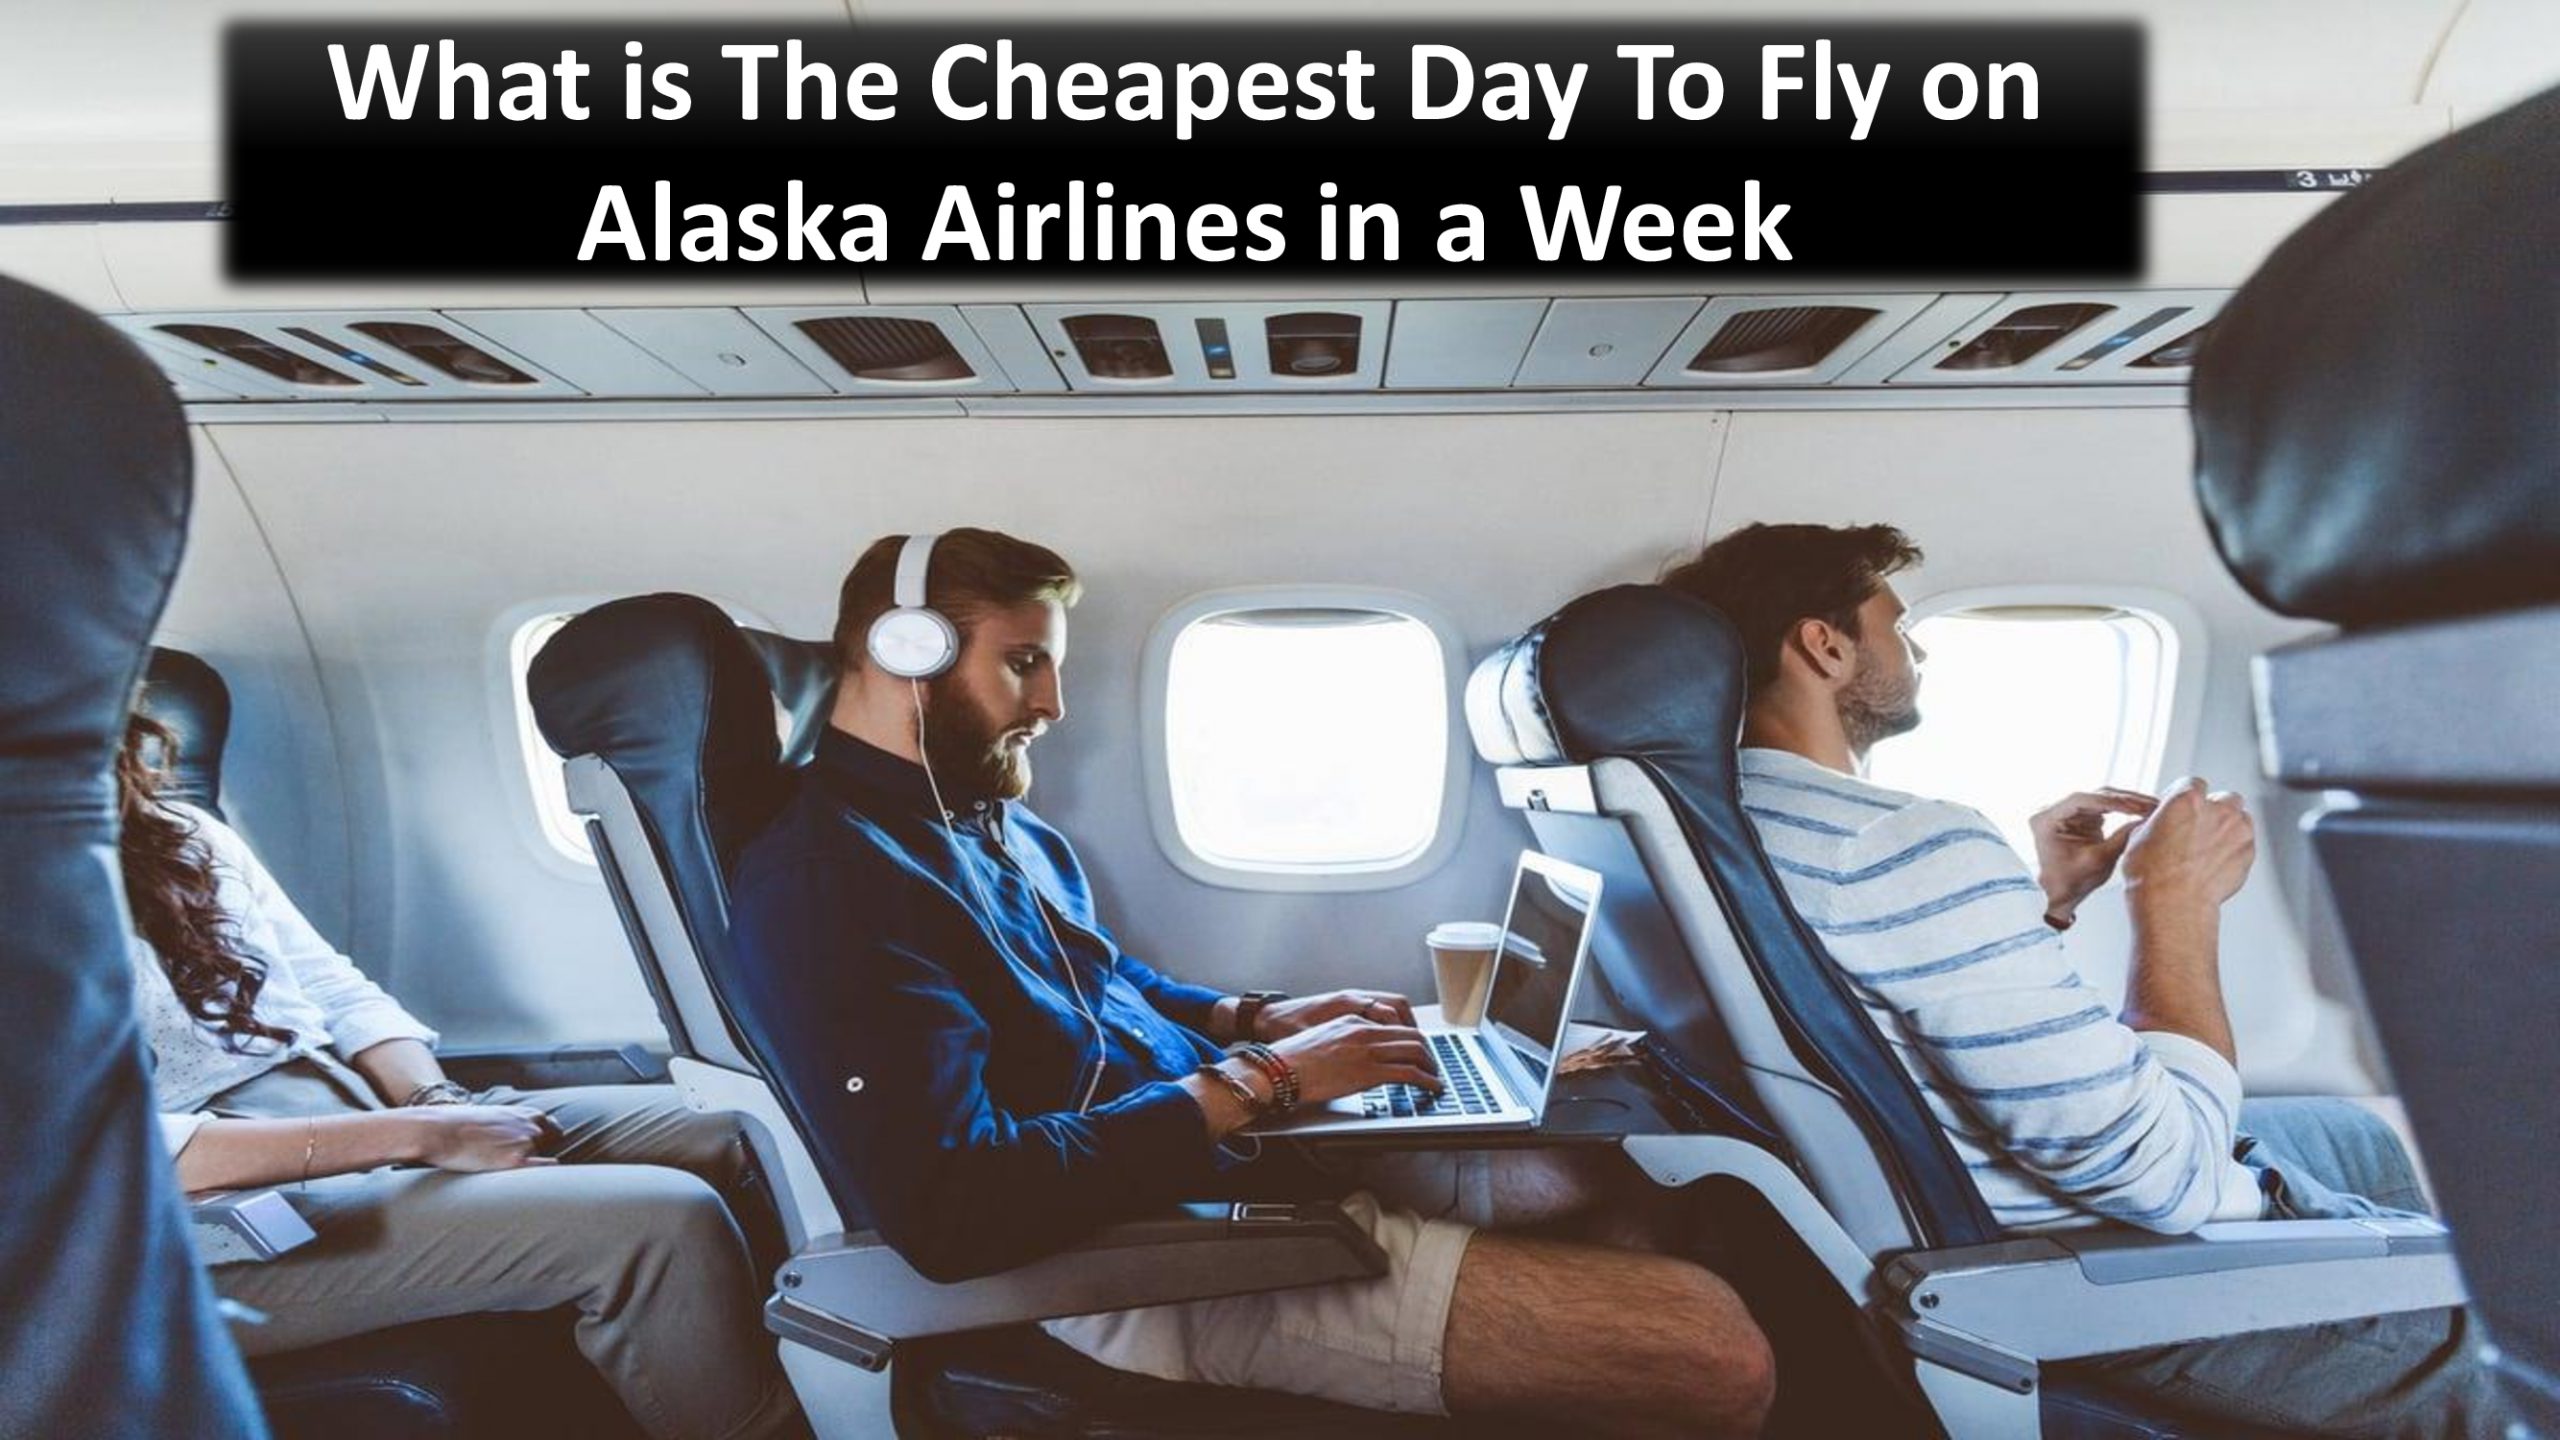 What is the cheapest day to fly on Alaska Airlines in a week